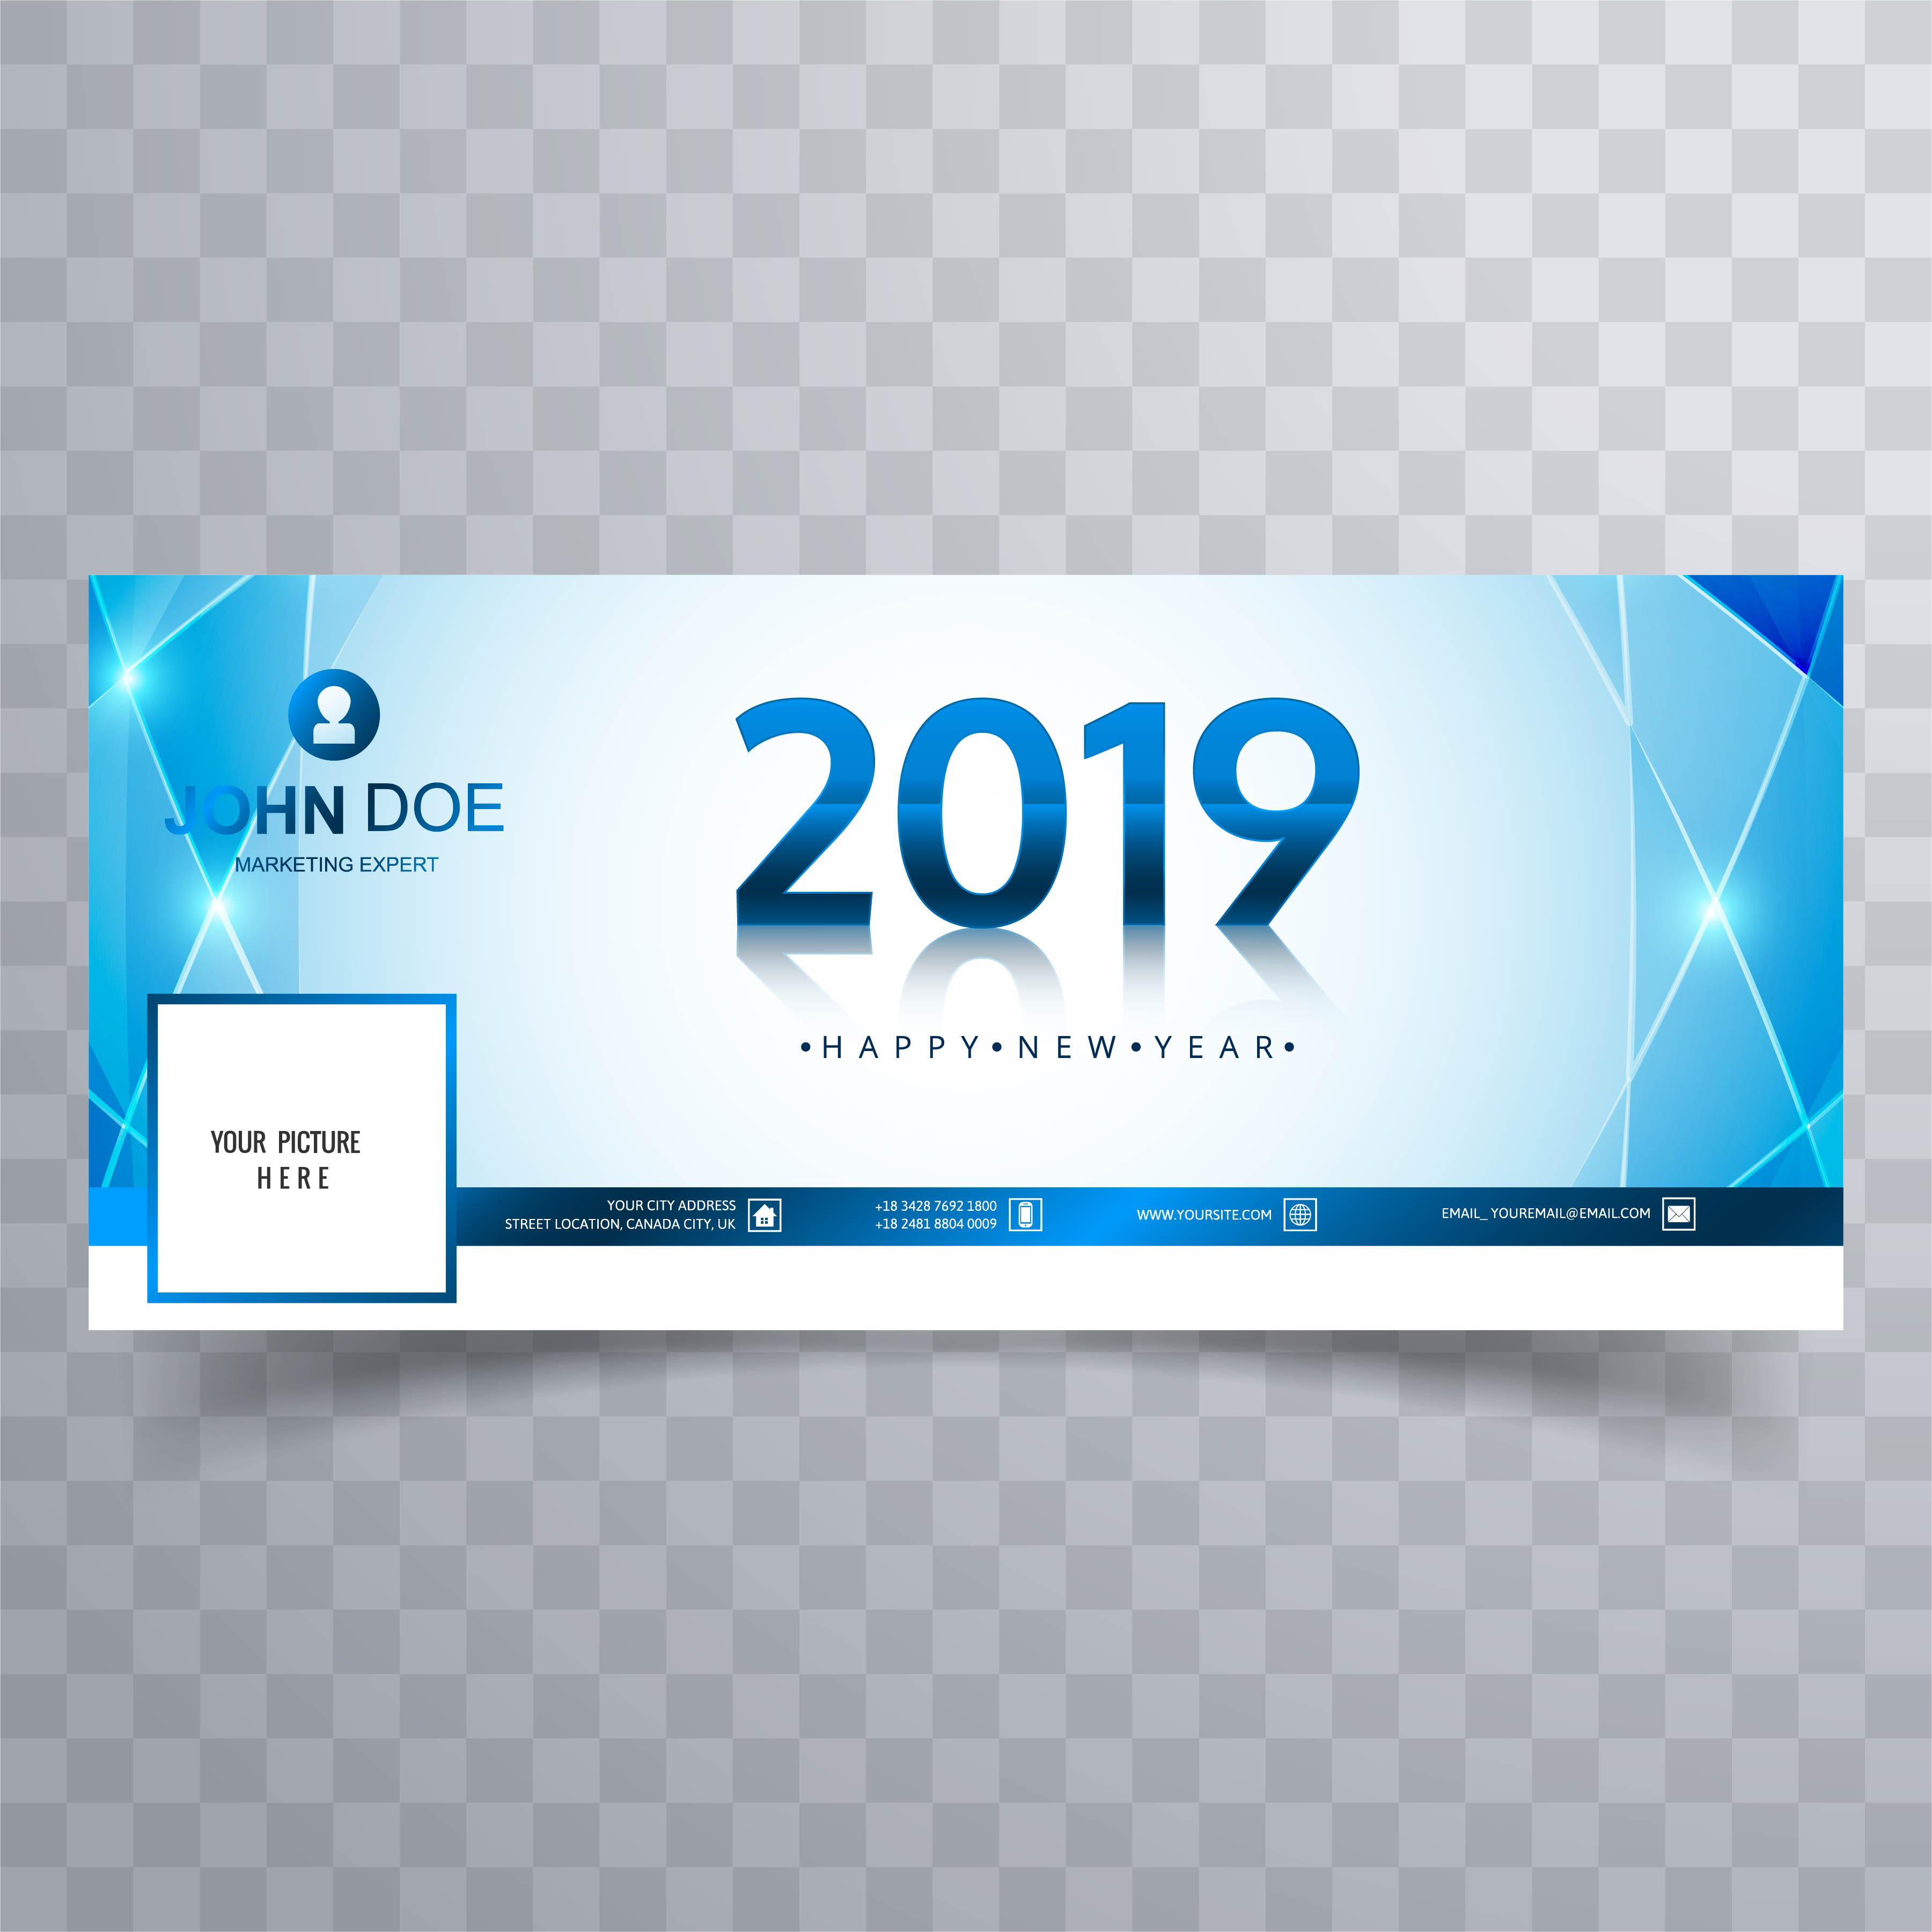 Download Free Psd Template 2019 PSD Mockups.